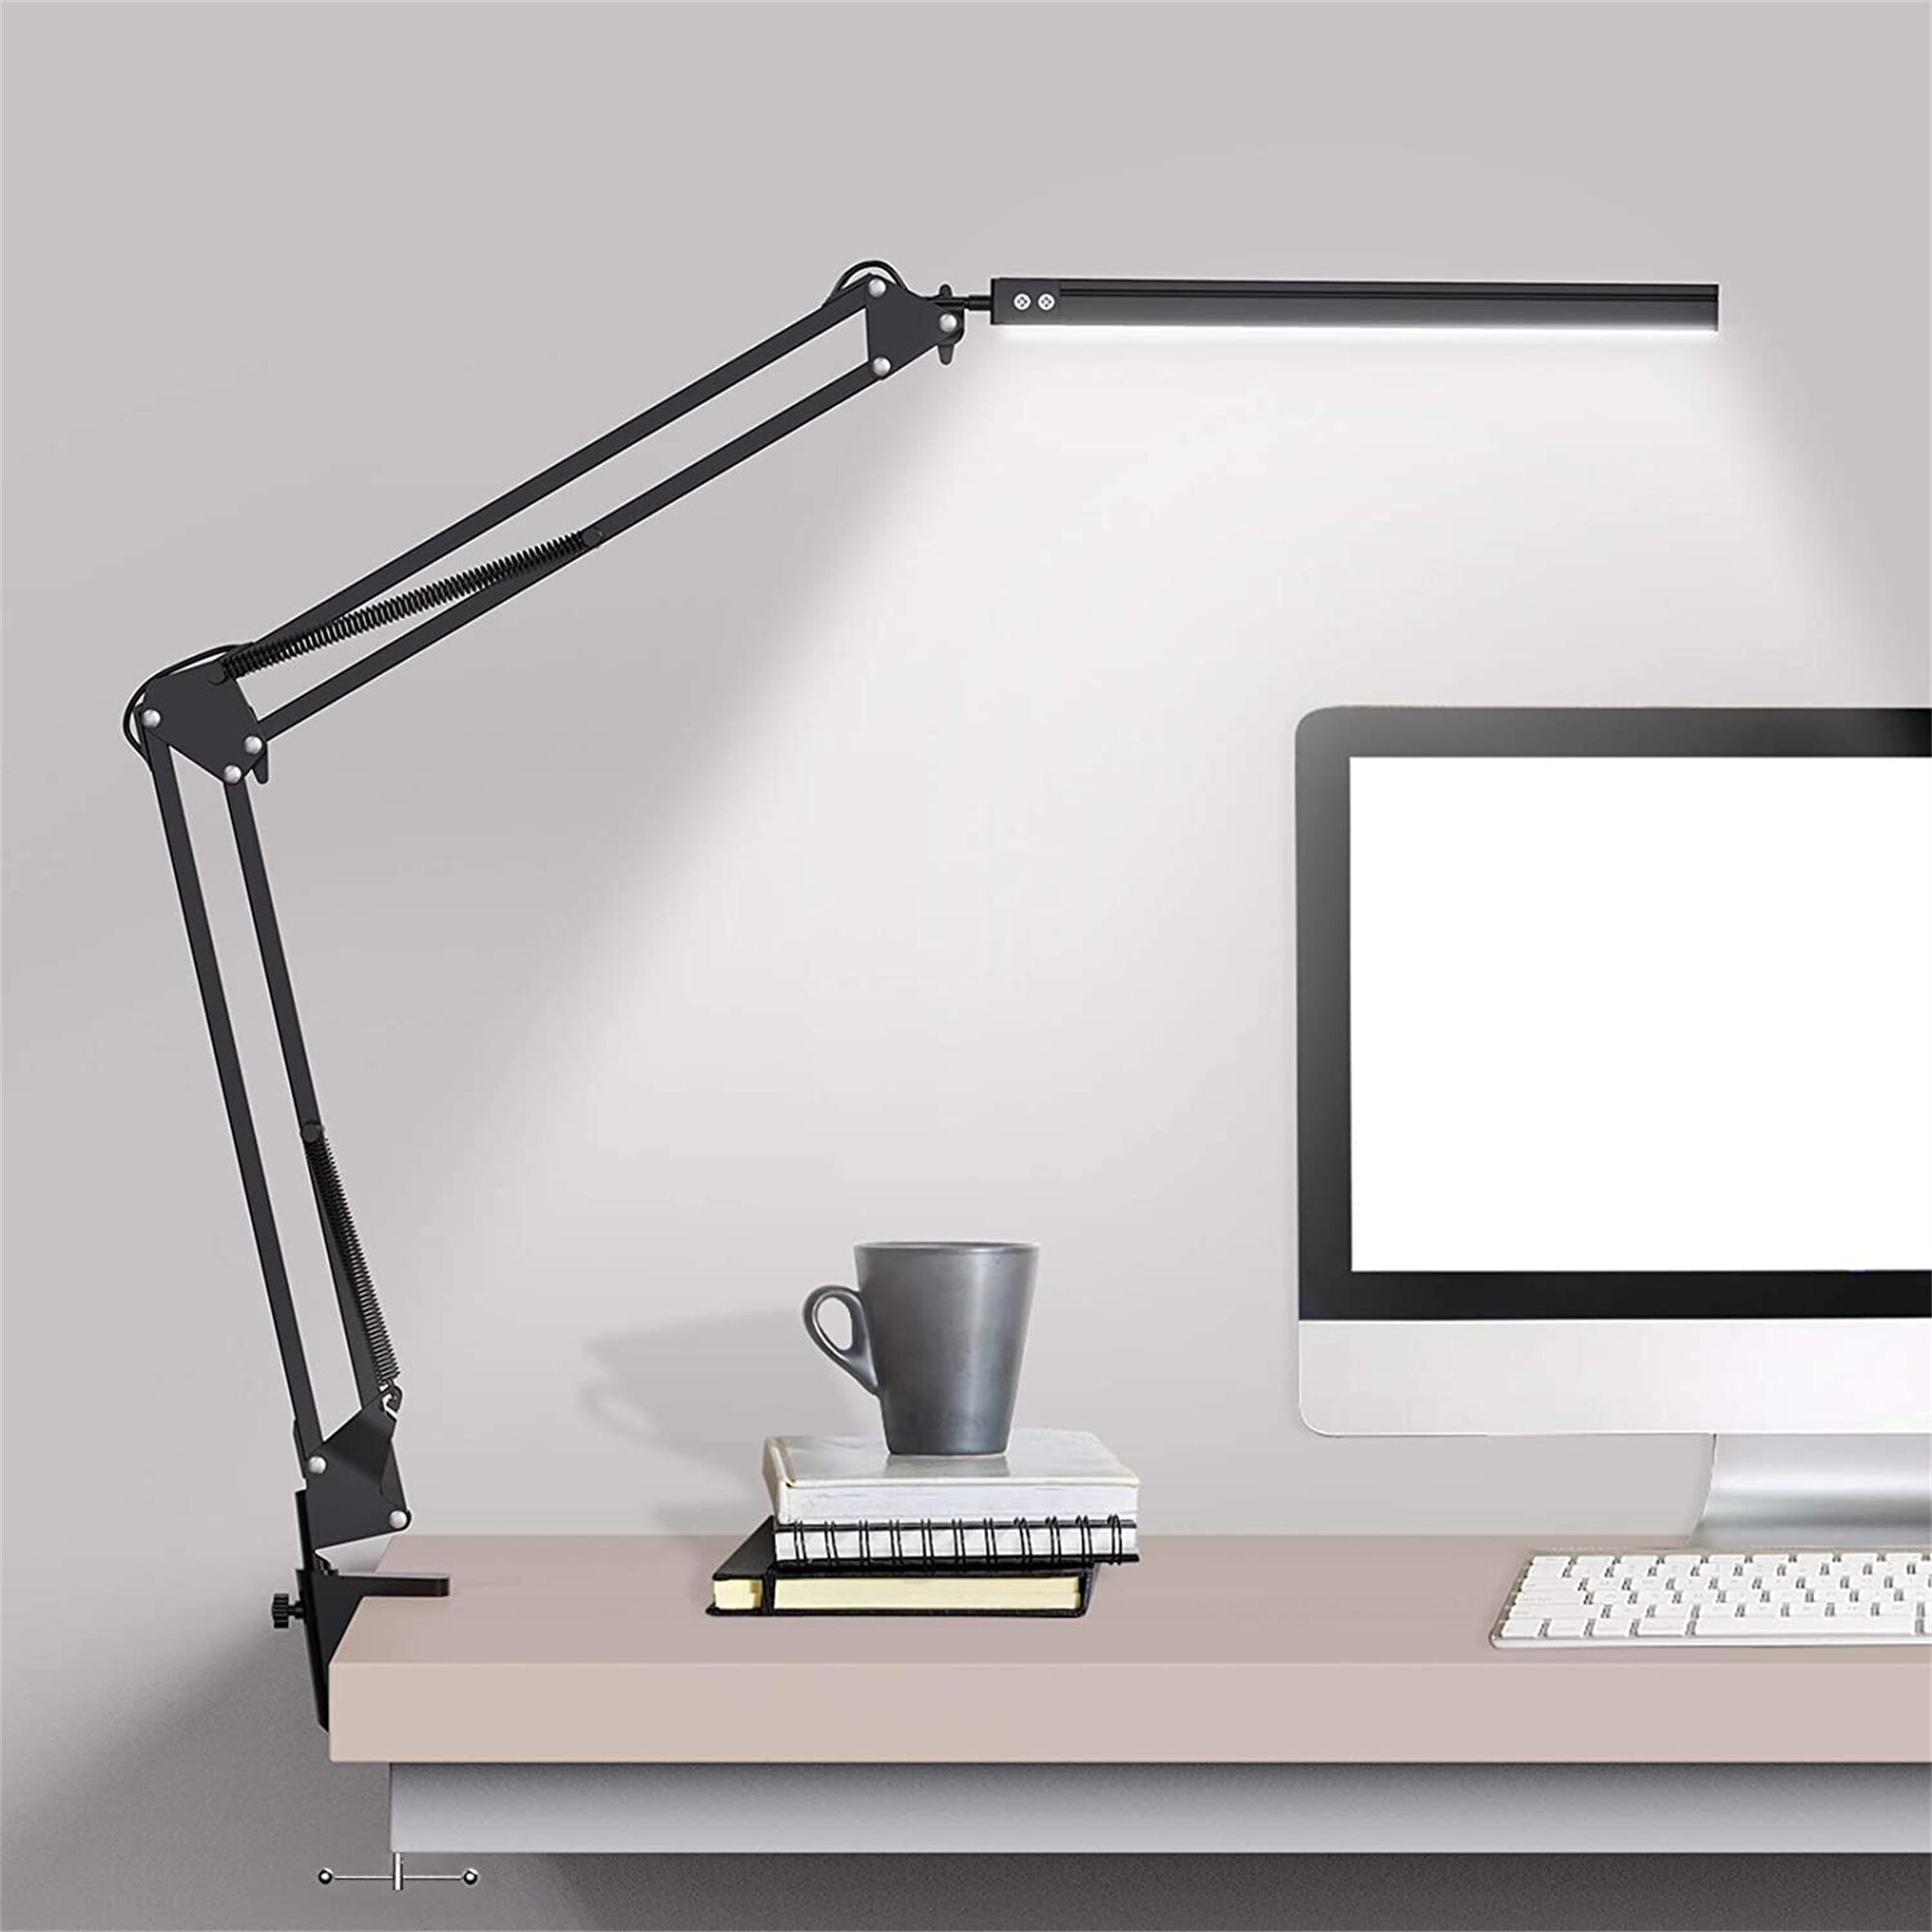 for Task Study Eye Care Table Lamp with Clamp White Metal Swing Arm Dimmable Task Lamp 3 Color Modes, 9-Level Dimmer LED Architect Desk Lamp 